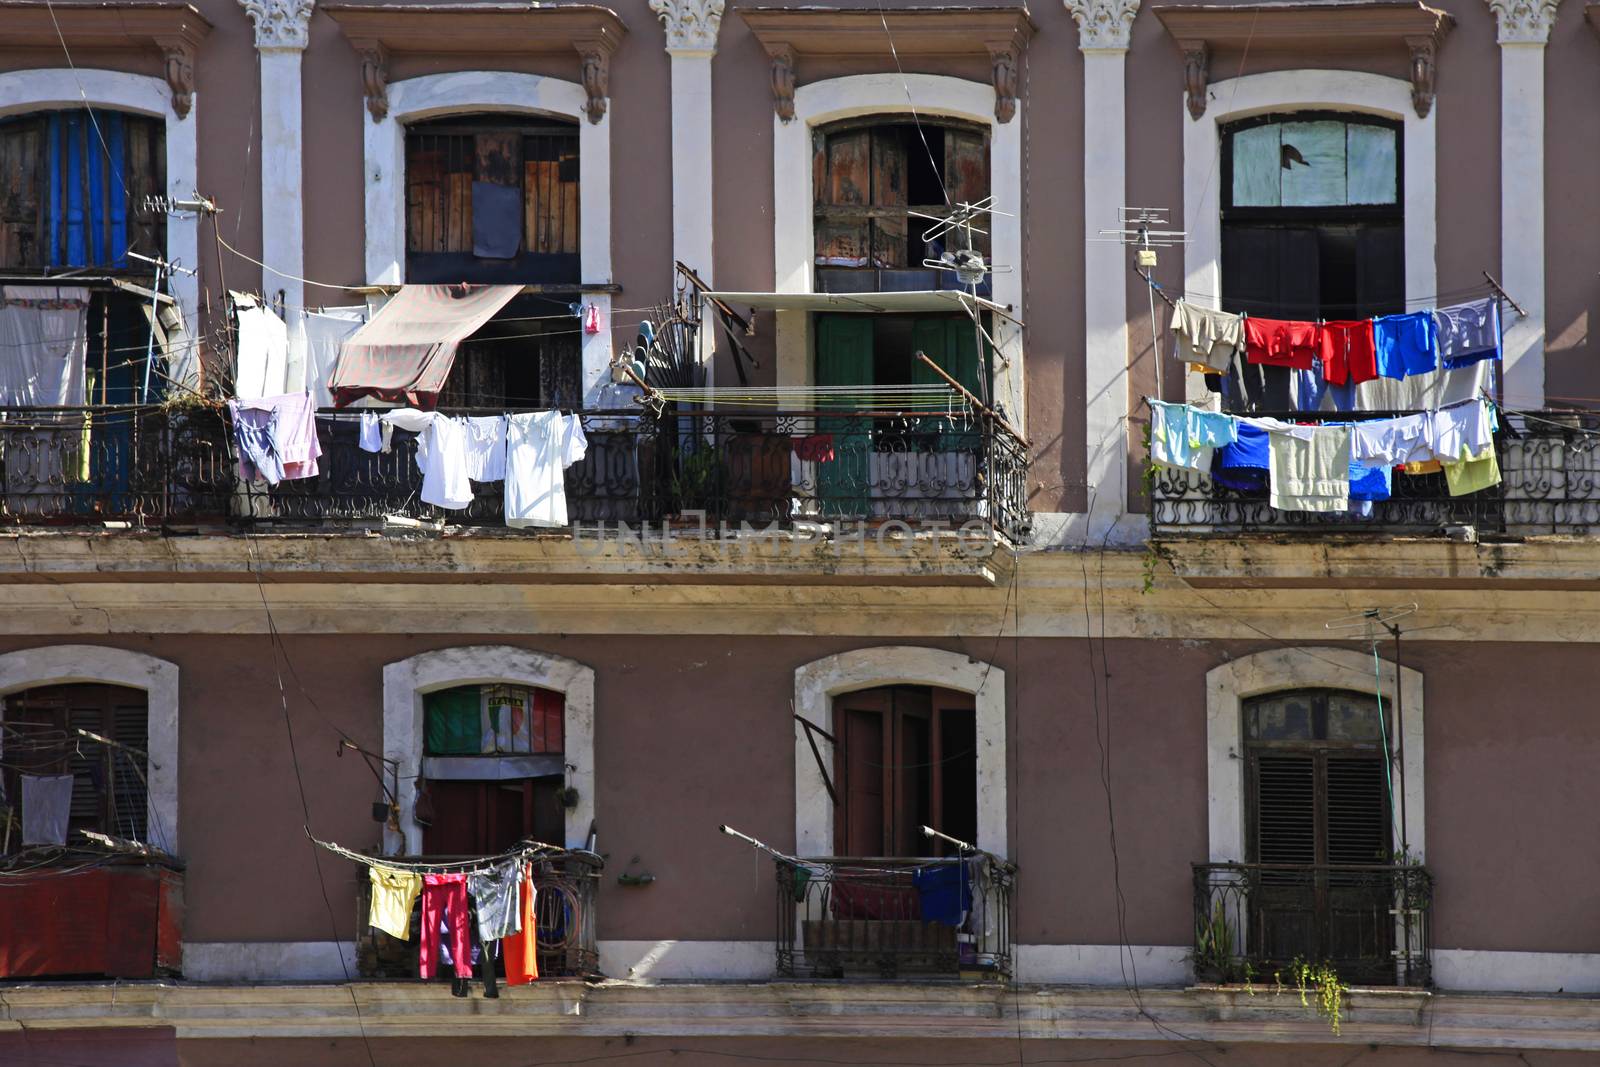 Hanging laundry to dry on balcony in Havana, Cuba by friday